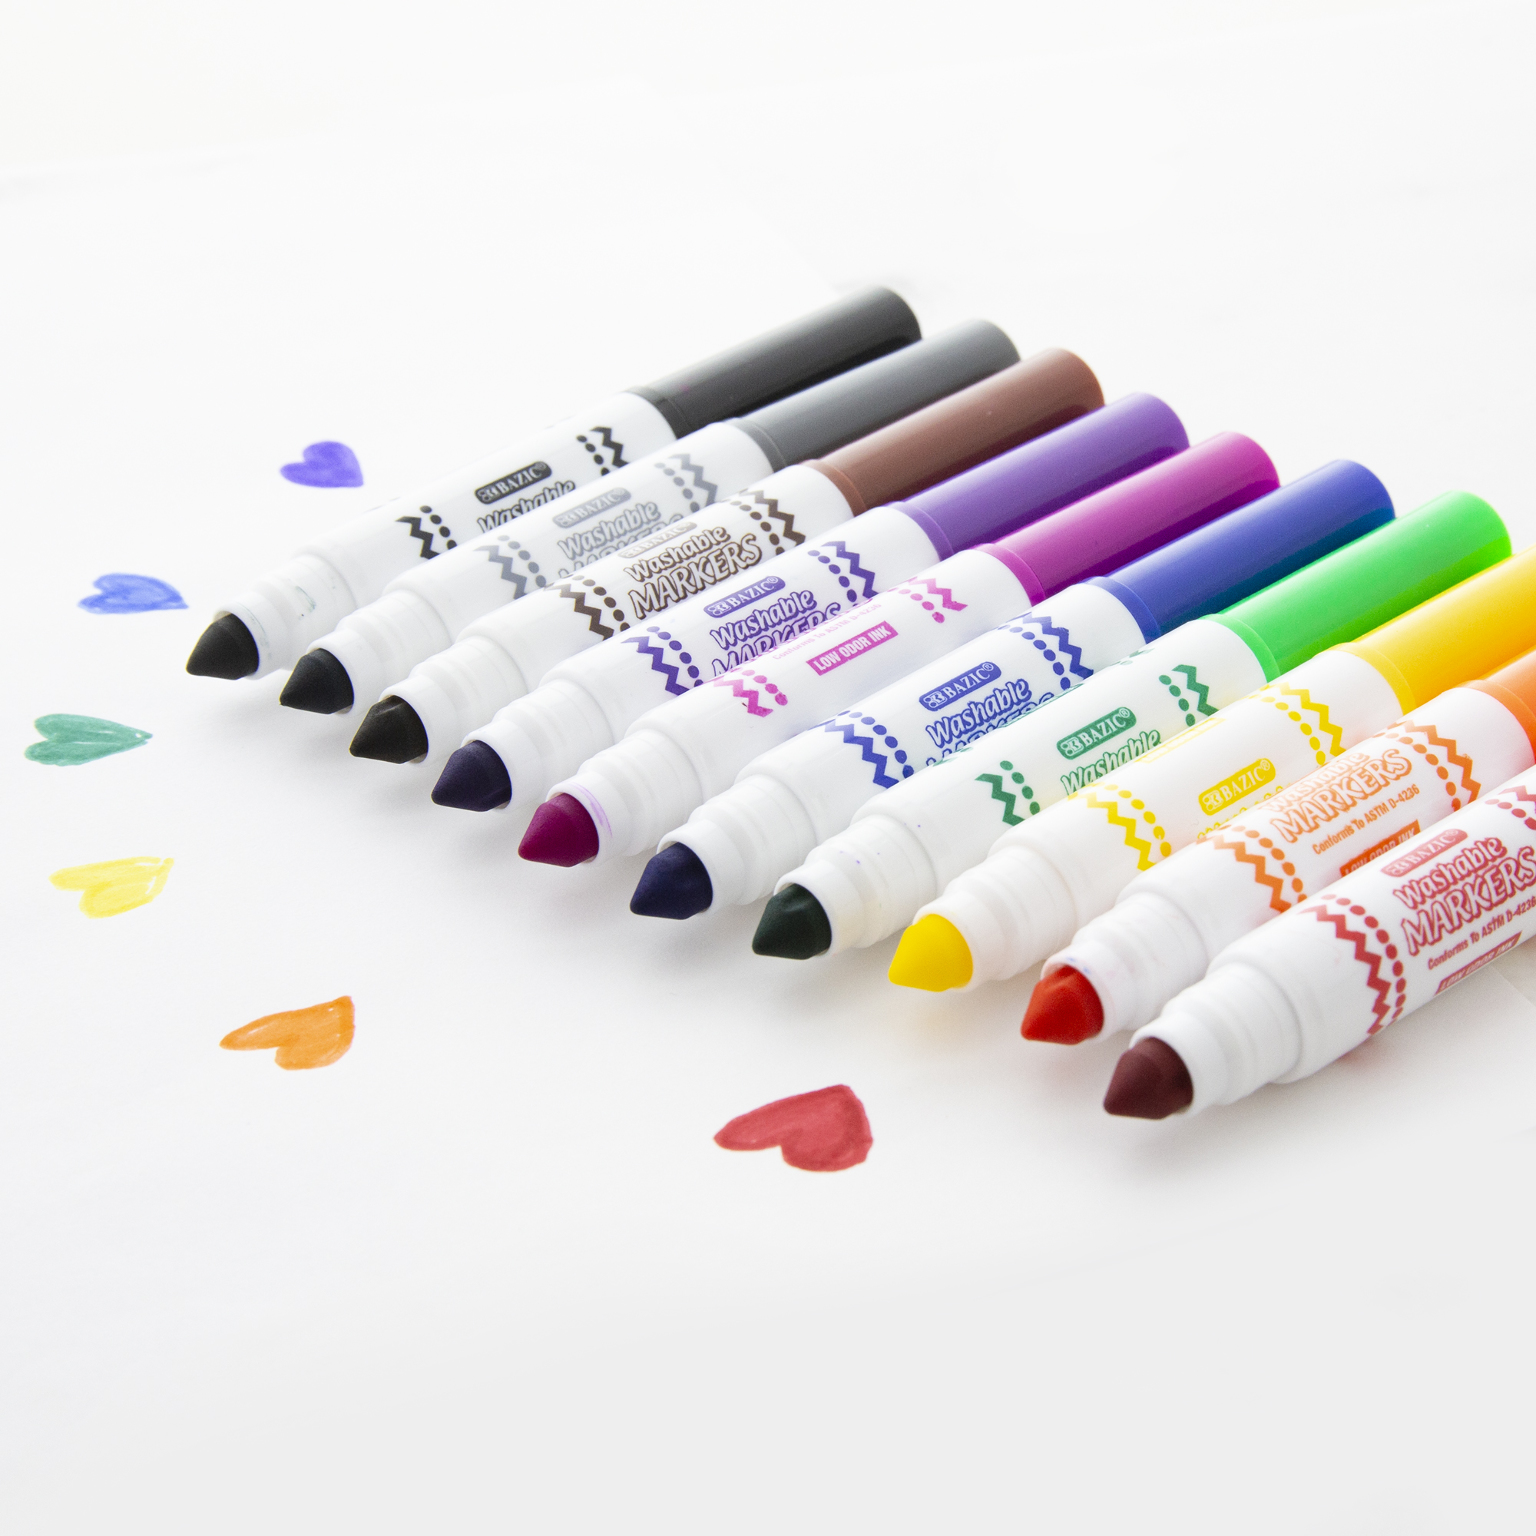 BAZIC Washable Markers Fine Line 24 Color Coloring Marker (24/Pack